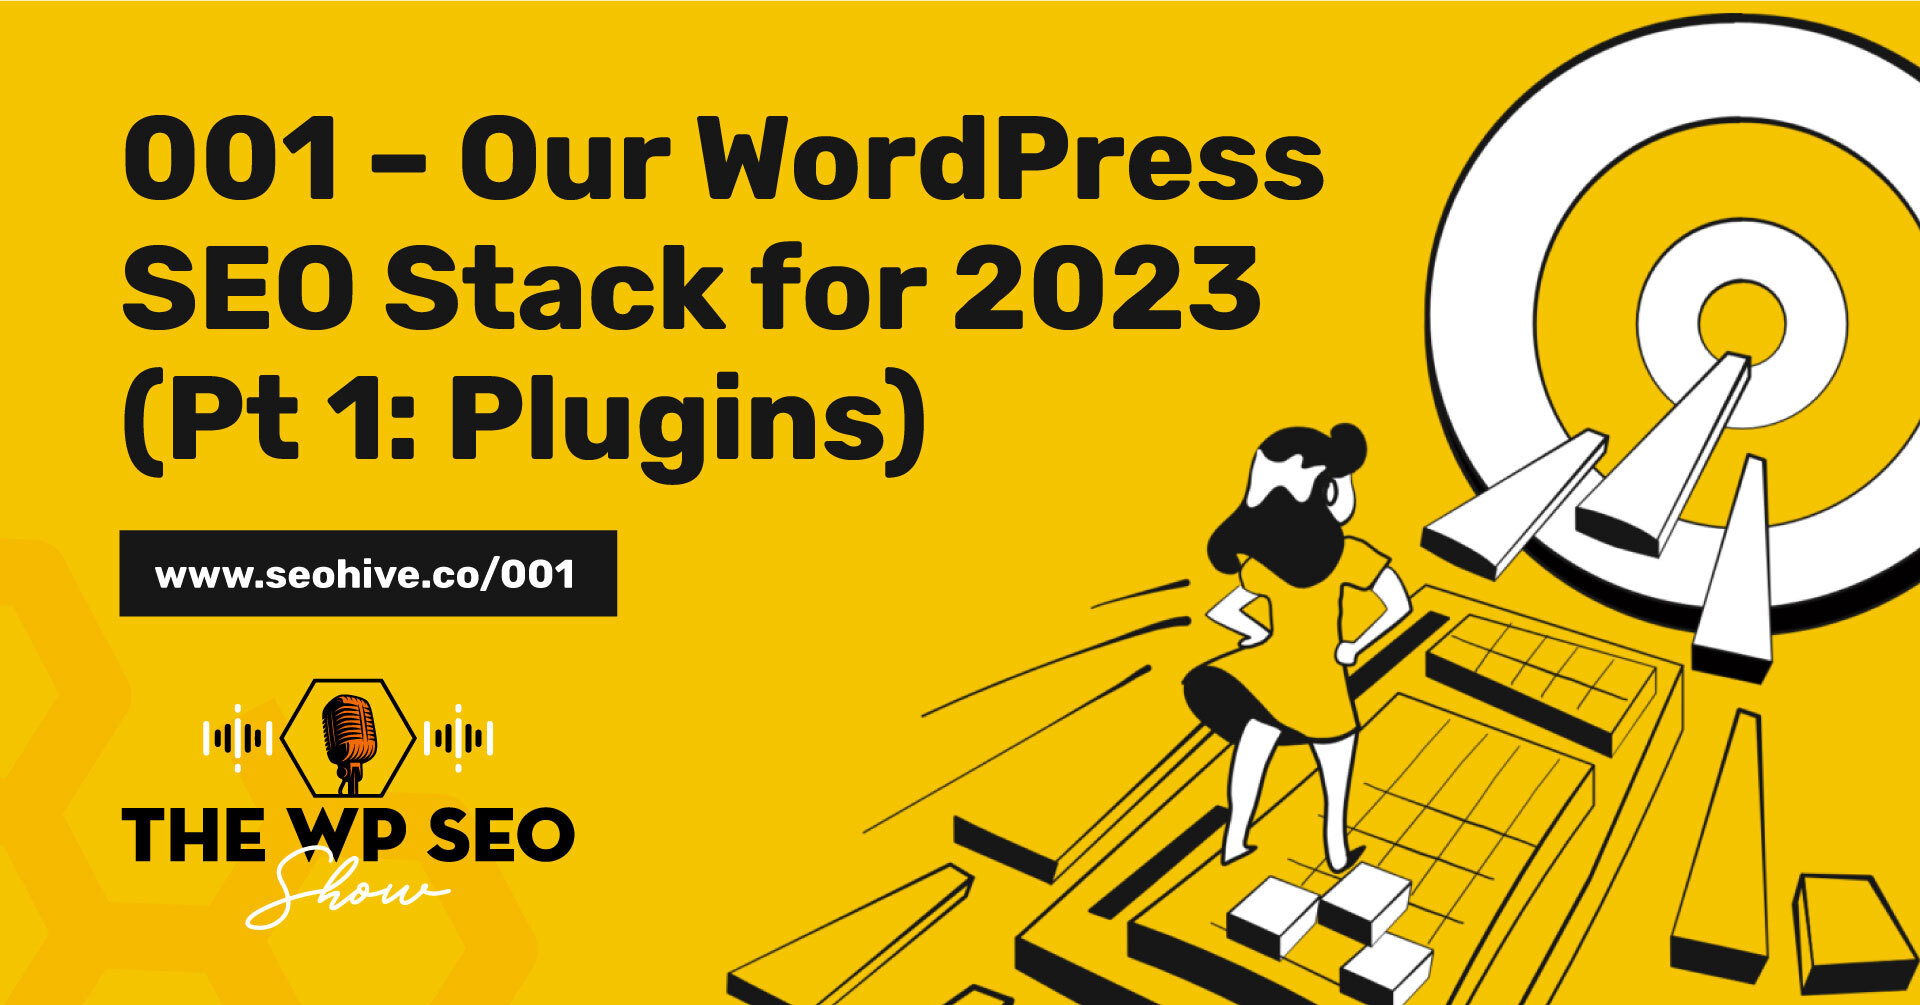 001 - Our WordPress SEO Stack for 2023 (Pt. 1: Plugins)